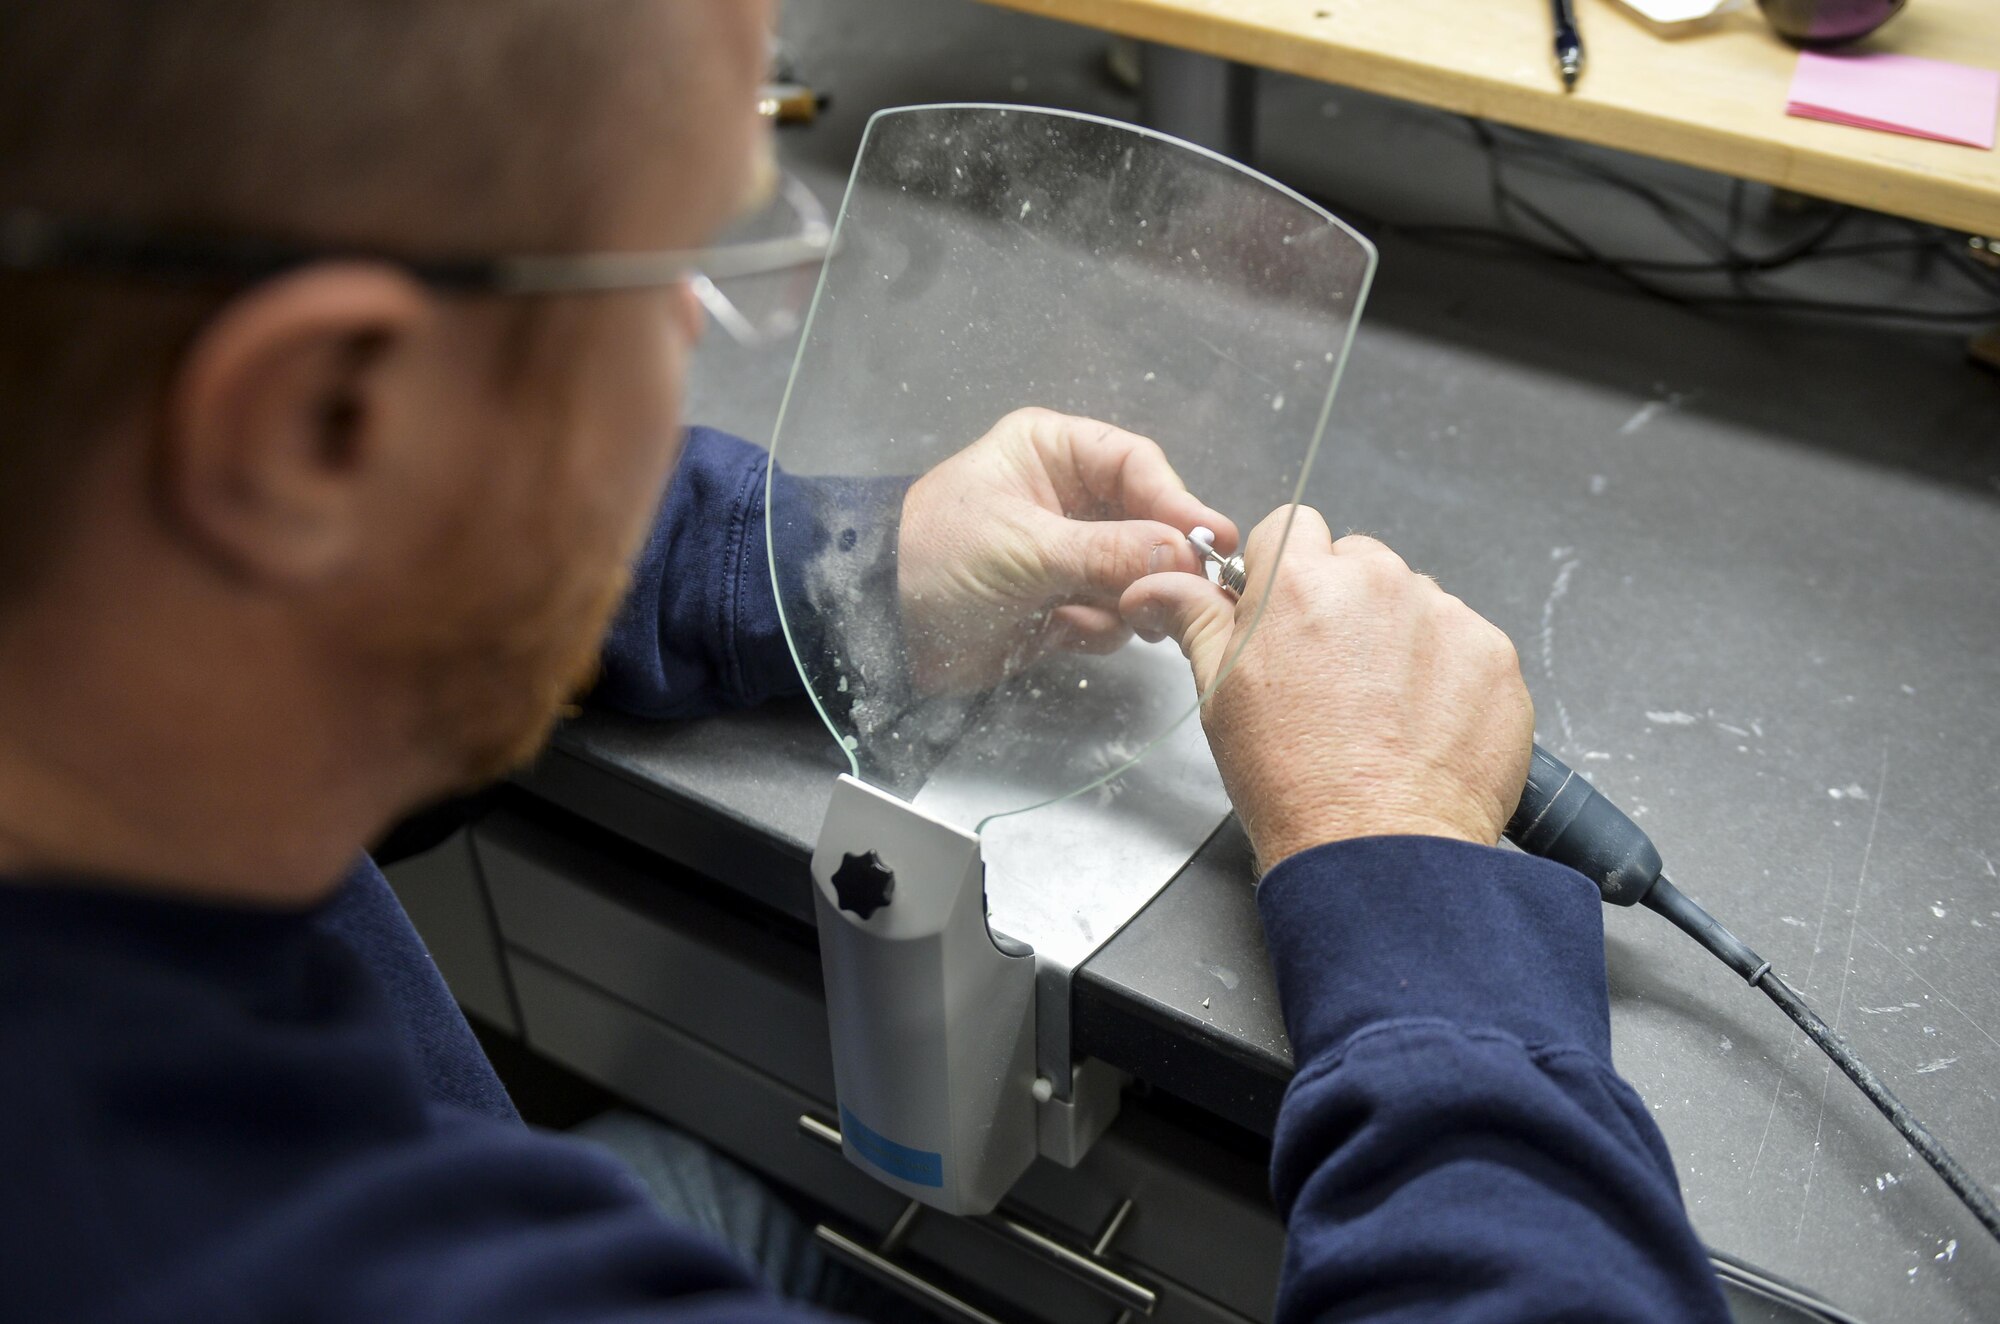 Denny Shaffer, 2nd Dental Squadron laboratory technician, applies finishing touches to a recently milled crown at Barksdale Air Force Base, La., Feb. 12, 2016. Shaffer manually applied finishing touches to the crown by making a series of adjustments to provide the patient with a proper fit. (U.S. Air Force photo/Airman 1st Class Mozer O. Da Cunha)